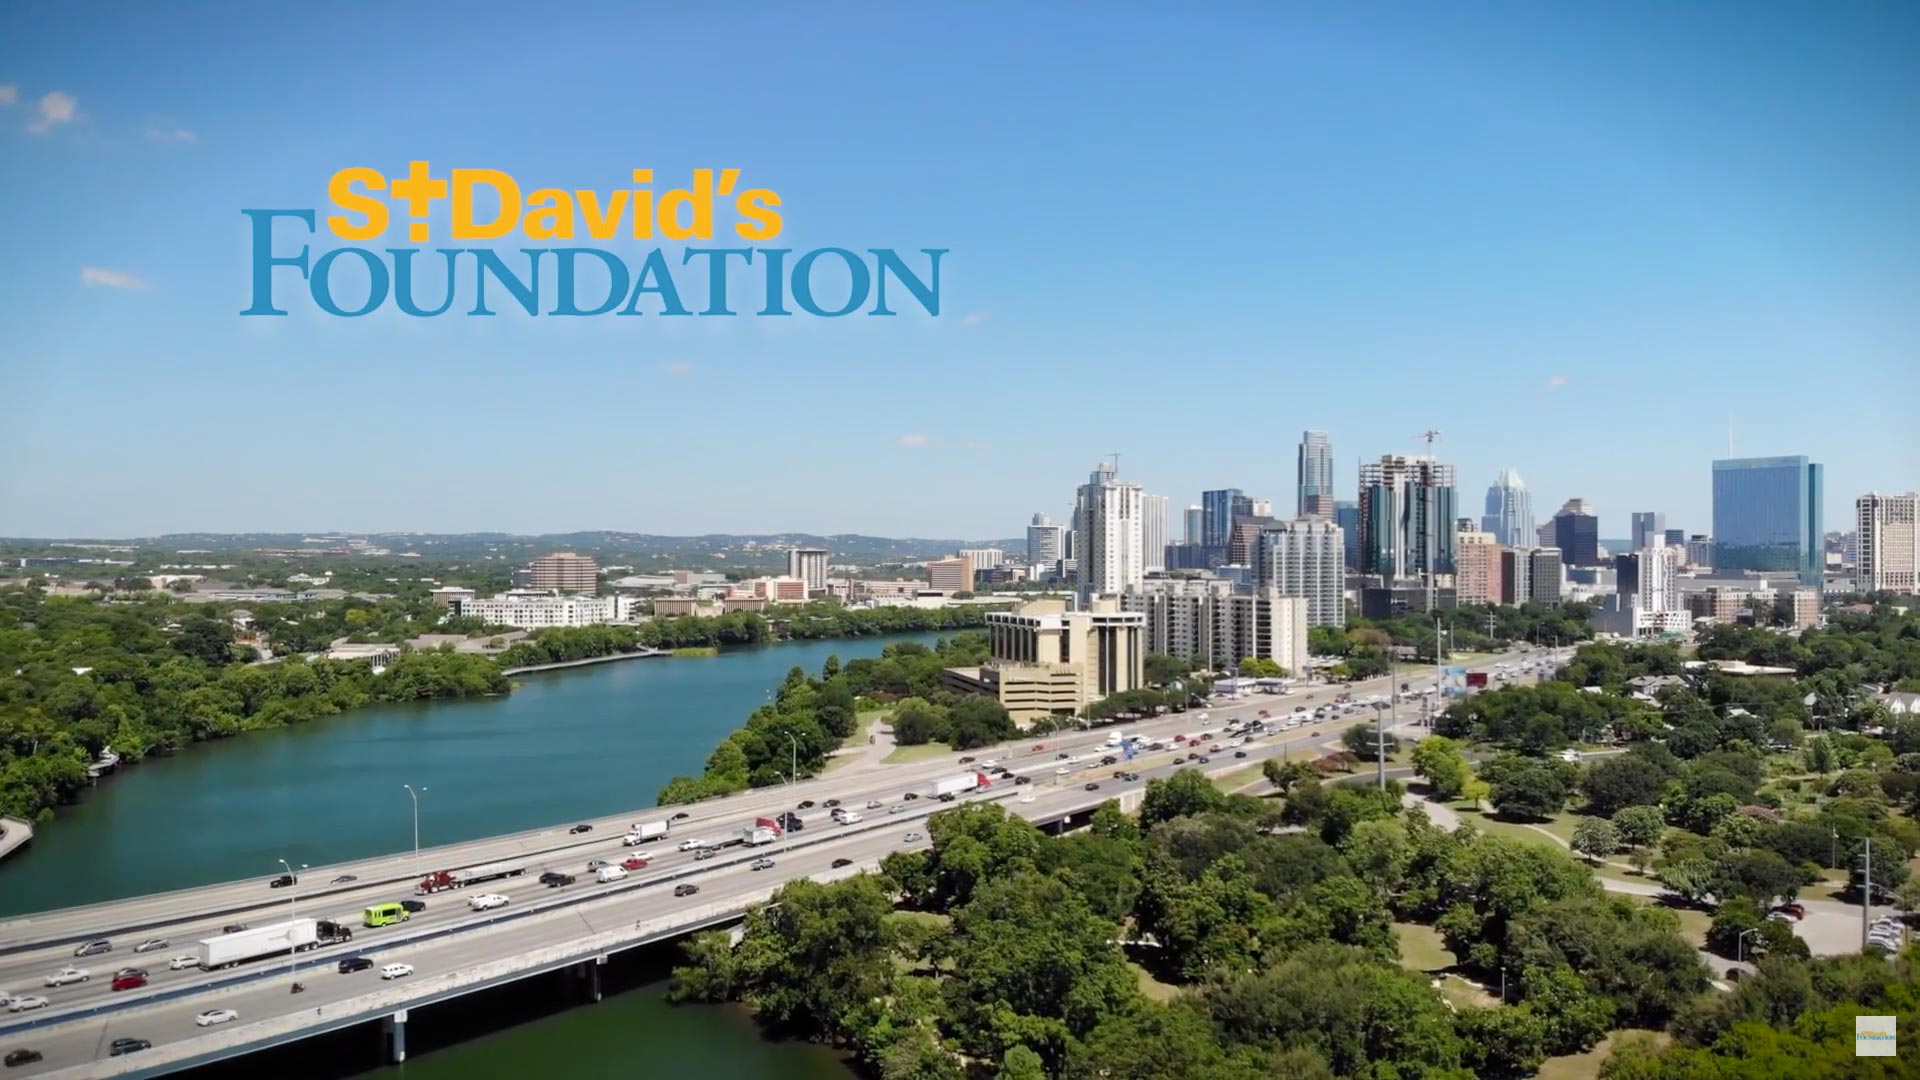 A logo for St. David's Foundation is superimposed in the top left corner of an image of the freeway heading into Austin, TX.